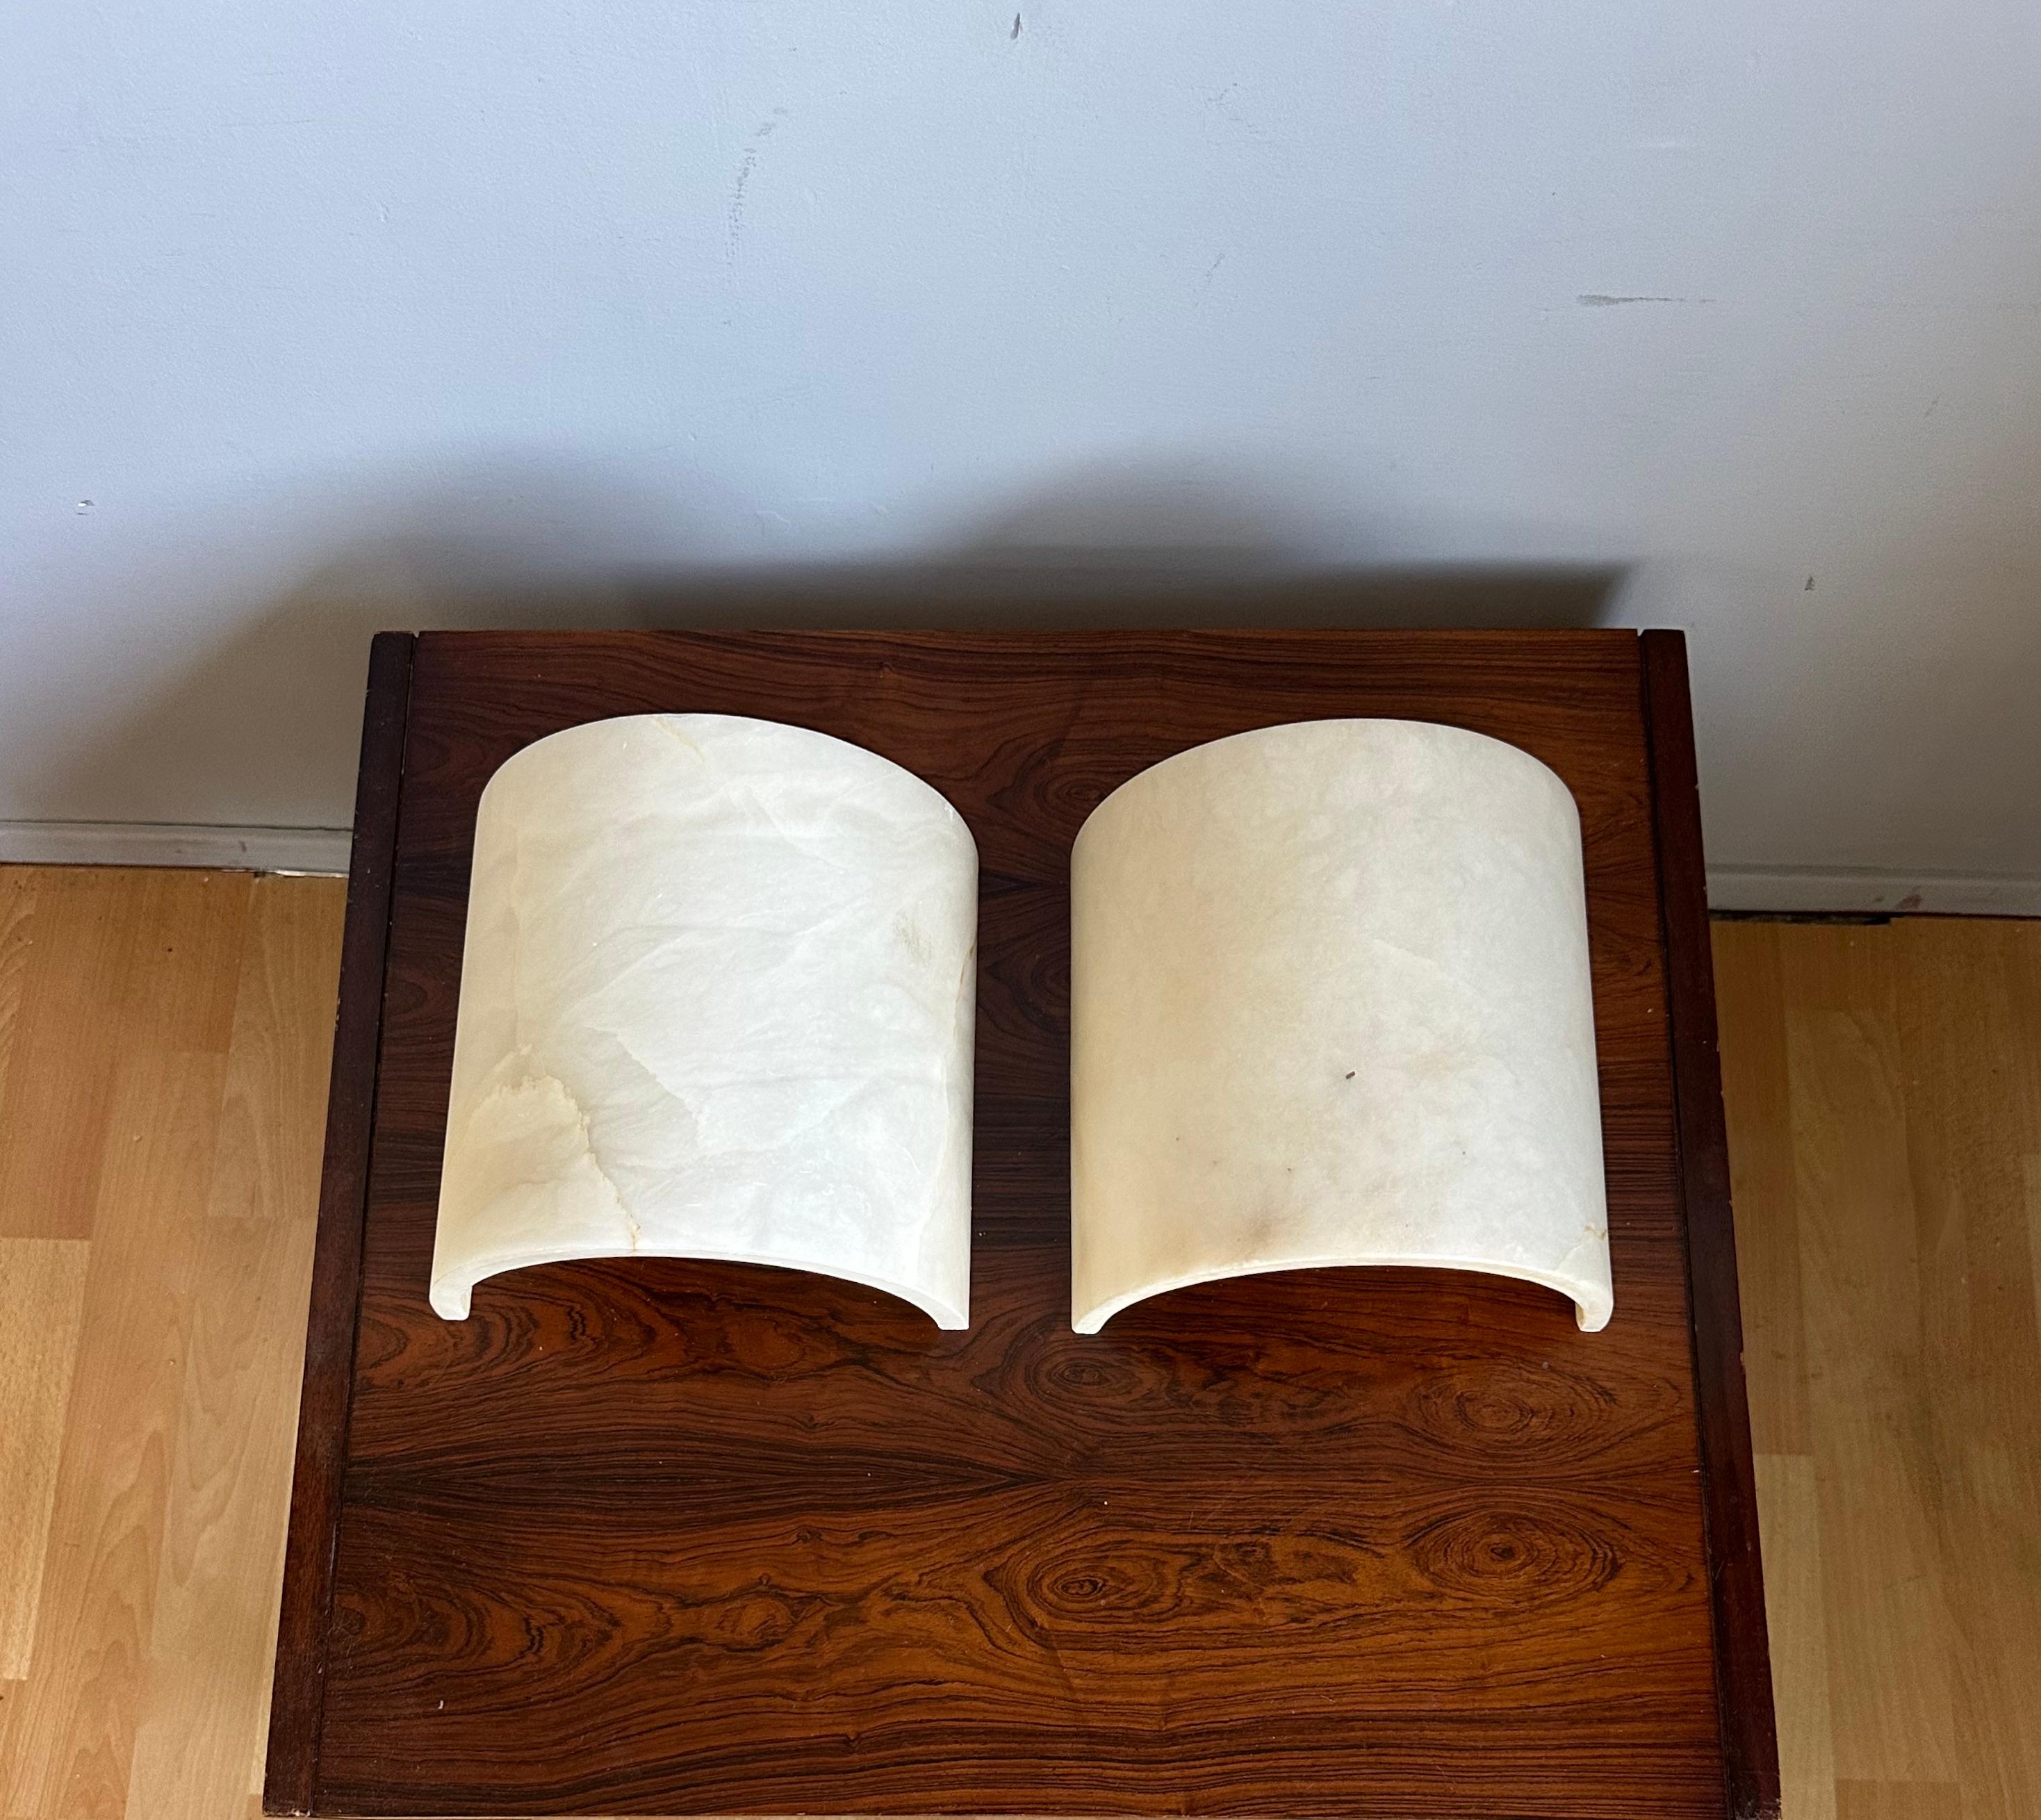 Great Pair of Art Deco Style Alabaster Up & Down Light Wall Sconces / Fixtures (20. Jahrhundert) im Angebot